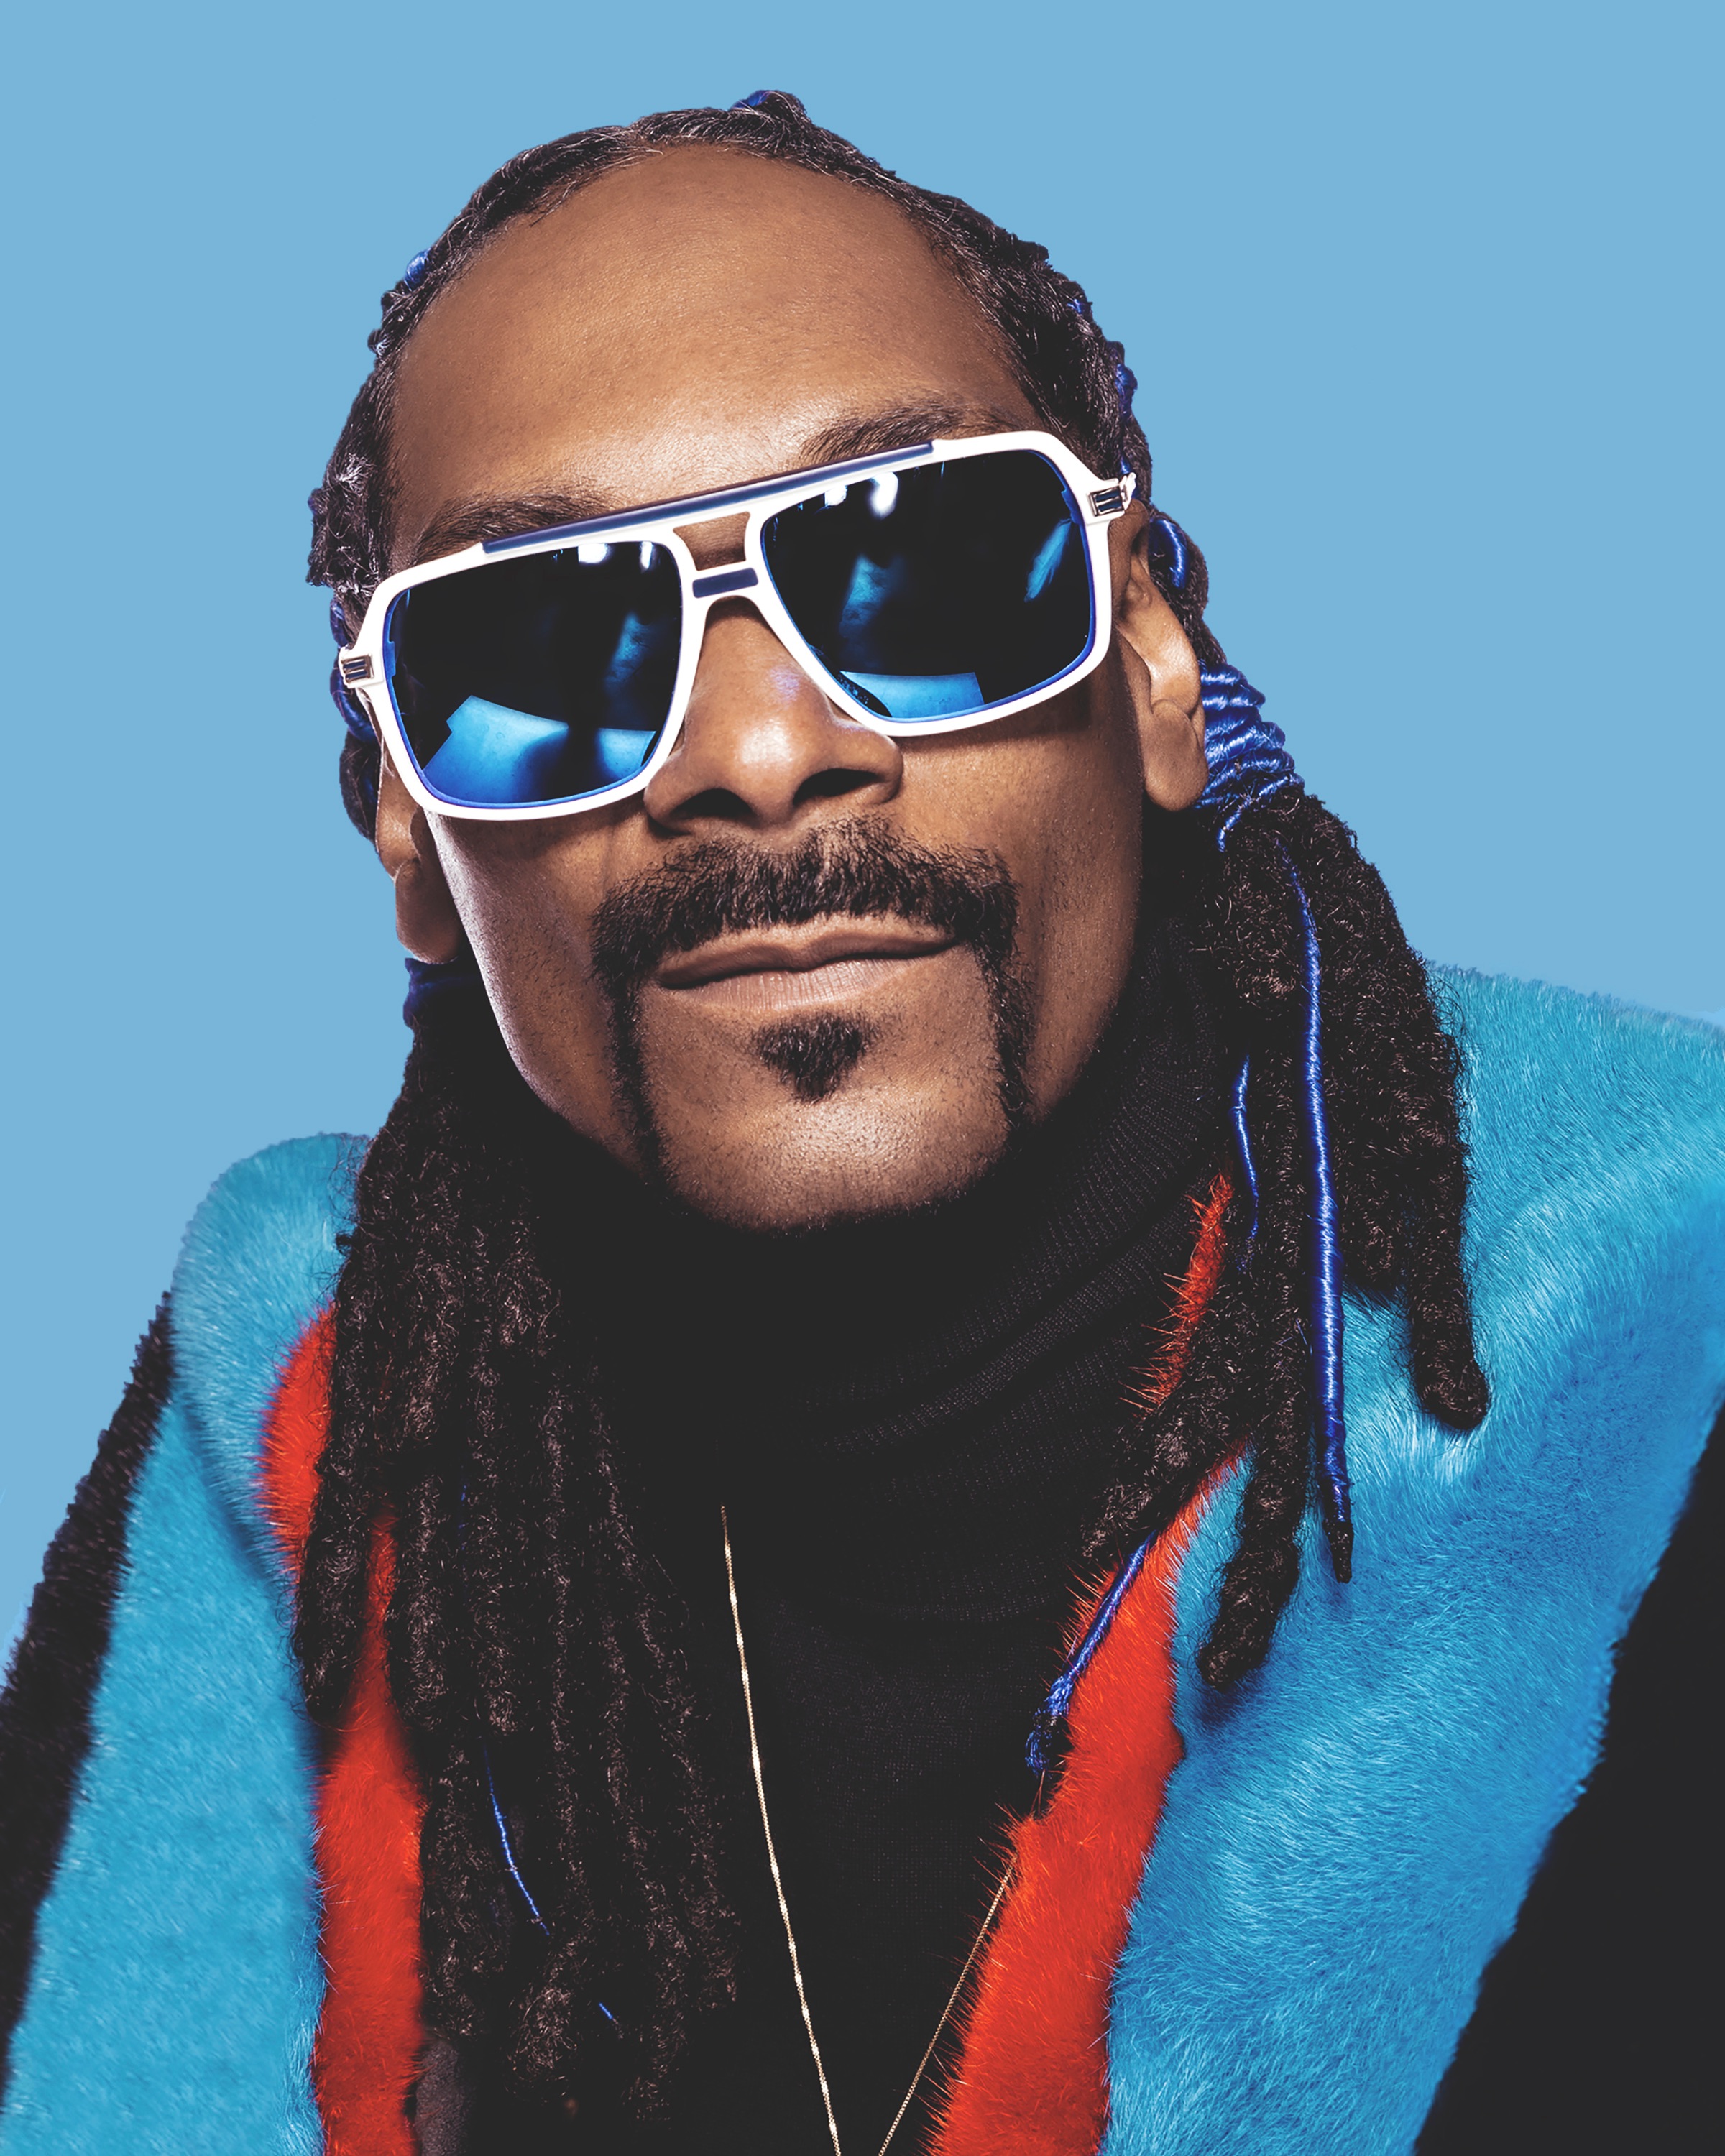 “Snoop Dogg is known worldwide as being one of the hottest rappers ever...his DJ skills are sure to keep the party hot. We are proud to have him spinning at eSports Arena. Wright, CEO Wright Records